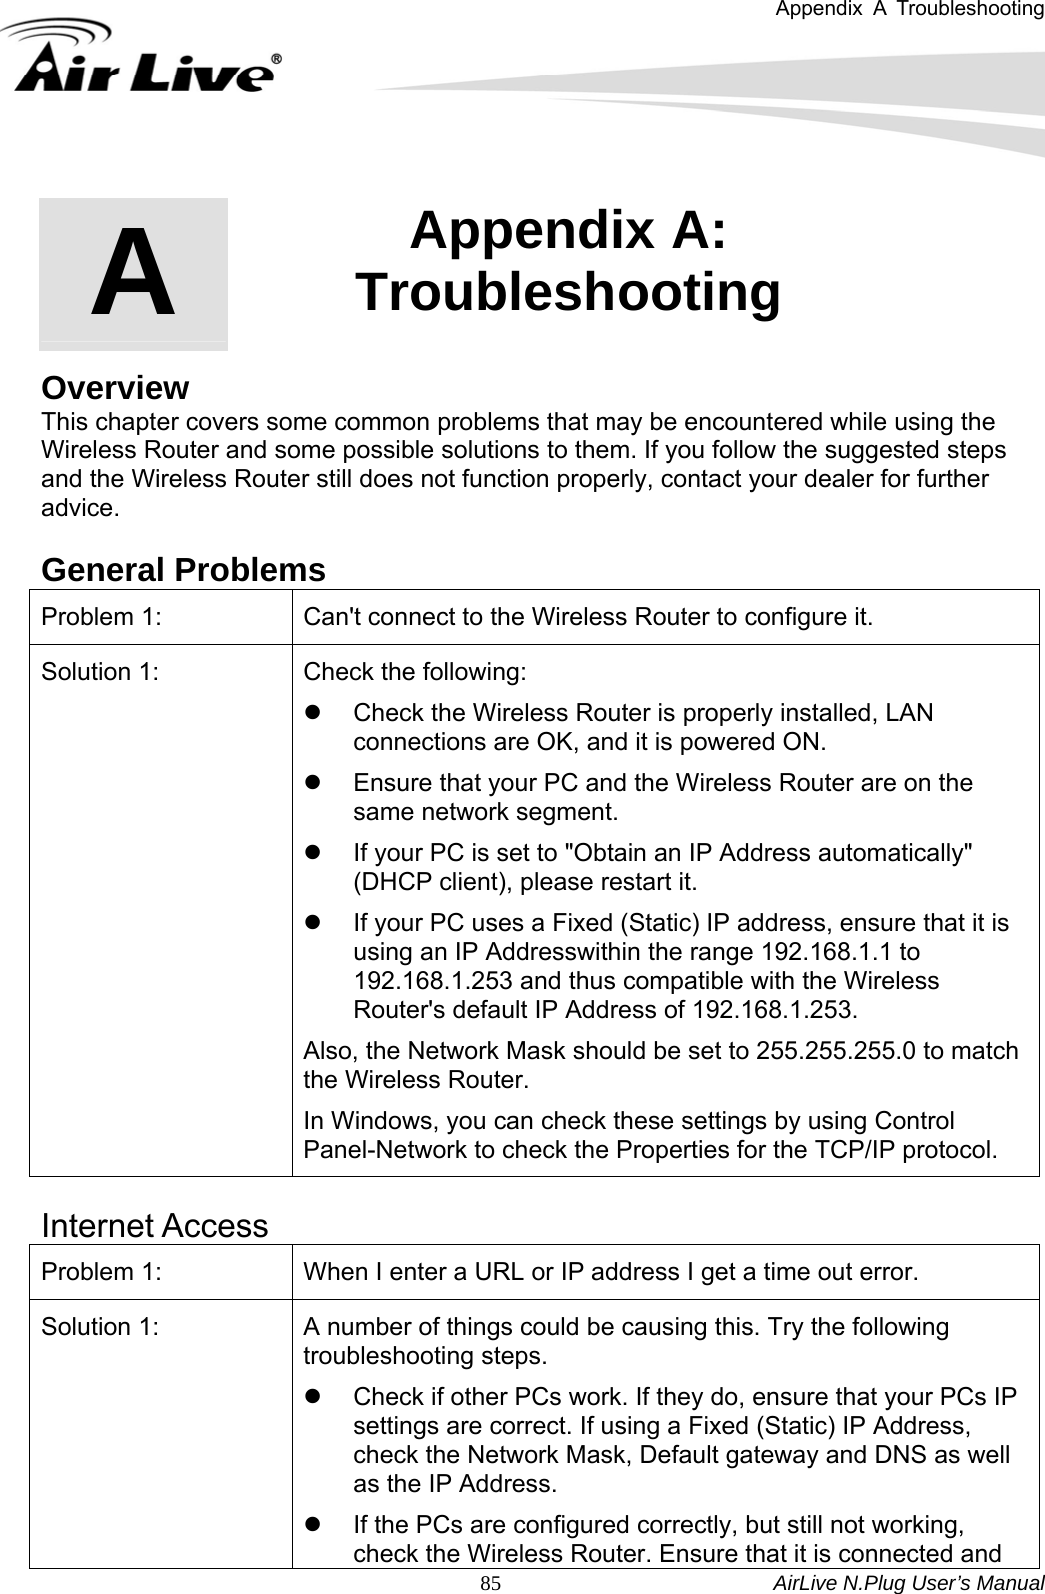 Appendix A Troubleshooting   AirLive N.Plug User’s Manual  85       Overview This chapter covers some common problems that may be encountered while using the Wireless Router and some possible solutions to them. If you follow the suggested steps and the Wireless Router still does not function properly, contact your dealer for further advice.  General Problems Problem 1:  Can&apos;t connect to the Wireless Router to configure it. Solution 1:  Check the following:   z  Check the Wireless Router is properly installed, LAN connections are OK, and it is powered ON.   z  Ensure that your PC and the Wireless Router are on the same network segment. z  If your PC is set to &quot;Obtain an IP Address automatically&quot; (DHCP client), please restart it.   z  If your PC uses a Fixed (Static) IP address, ensure that it is using an IP Addresswithin the range 192.168.1.1 to 192.168.1.253 and thus compatible with the Wireless Router&apos;s default IP Address of 192.168.1.253.     Also, the Network Mask should be set to 255.255.255.0 to match the Wireless Router.   In Windows, you can check these settings by using Control Panel-Network to check the Properties for the TCP/IP protocol.    Internet Access Problem 1:  When I enter a URL or IP address I get a time out error. Solution 1:  A number of things could be causing this. Try the following troubleshooting steps.   z  Check if other PCs work. If they do, ensure that your PCs IP settings are correct. If using a Fixed (Static) IP Address, check the Network Mask, Default gateway and DNS as well as the IP Address.   z  If the PCs are configured correctly, but still not working, check the Wireless Router. Ensure that it is connected and A  Appendix A: Troubleshooting  